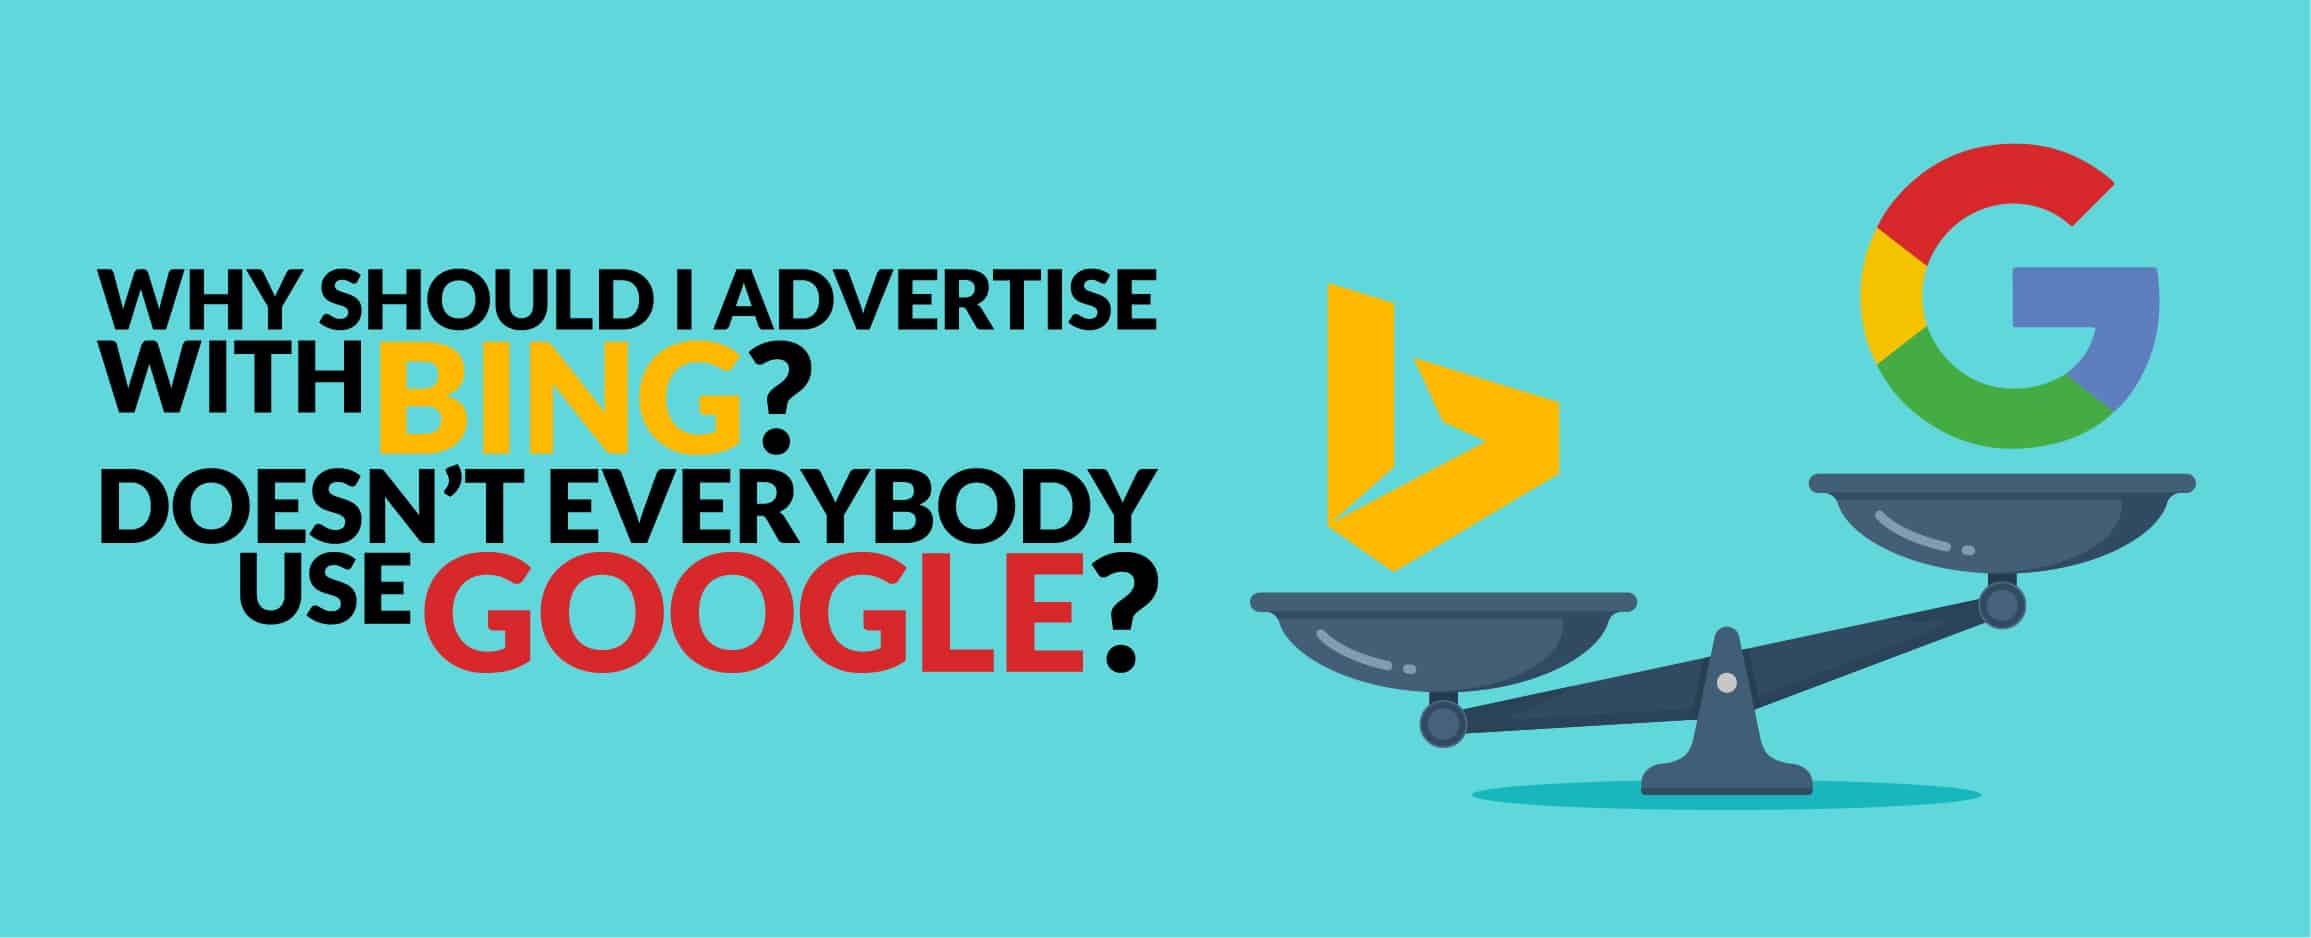 Why Should I Advertise with Bing? Doesn’t everybody use Google?